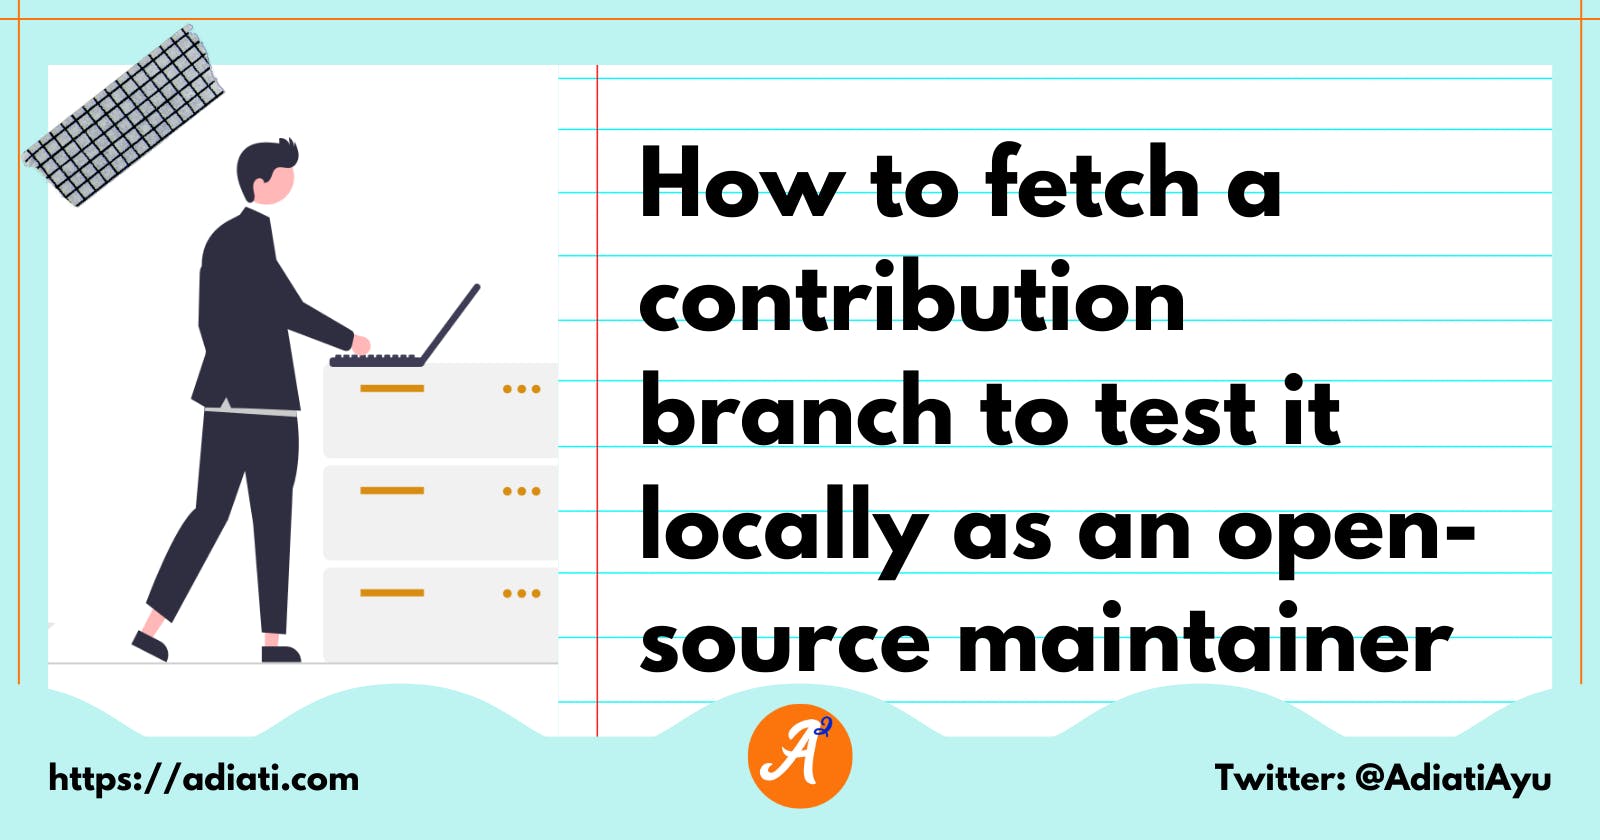 How to fetch a contribution branch to test it locally as an open-source maintainer